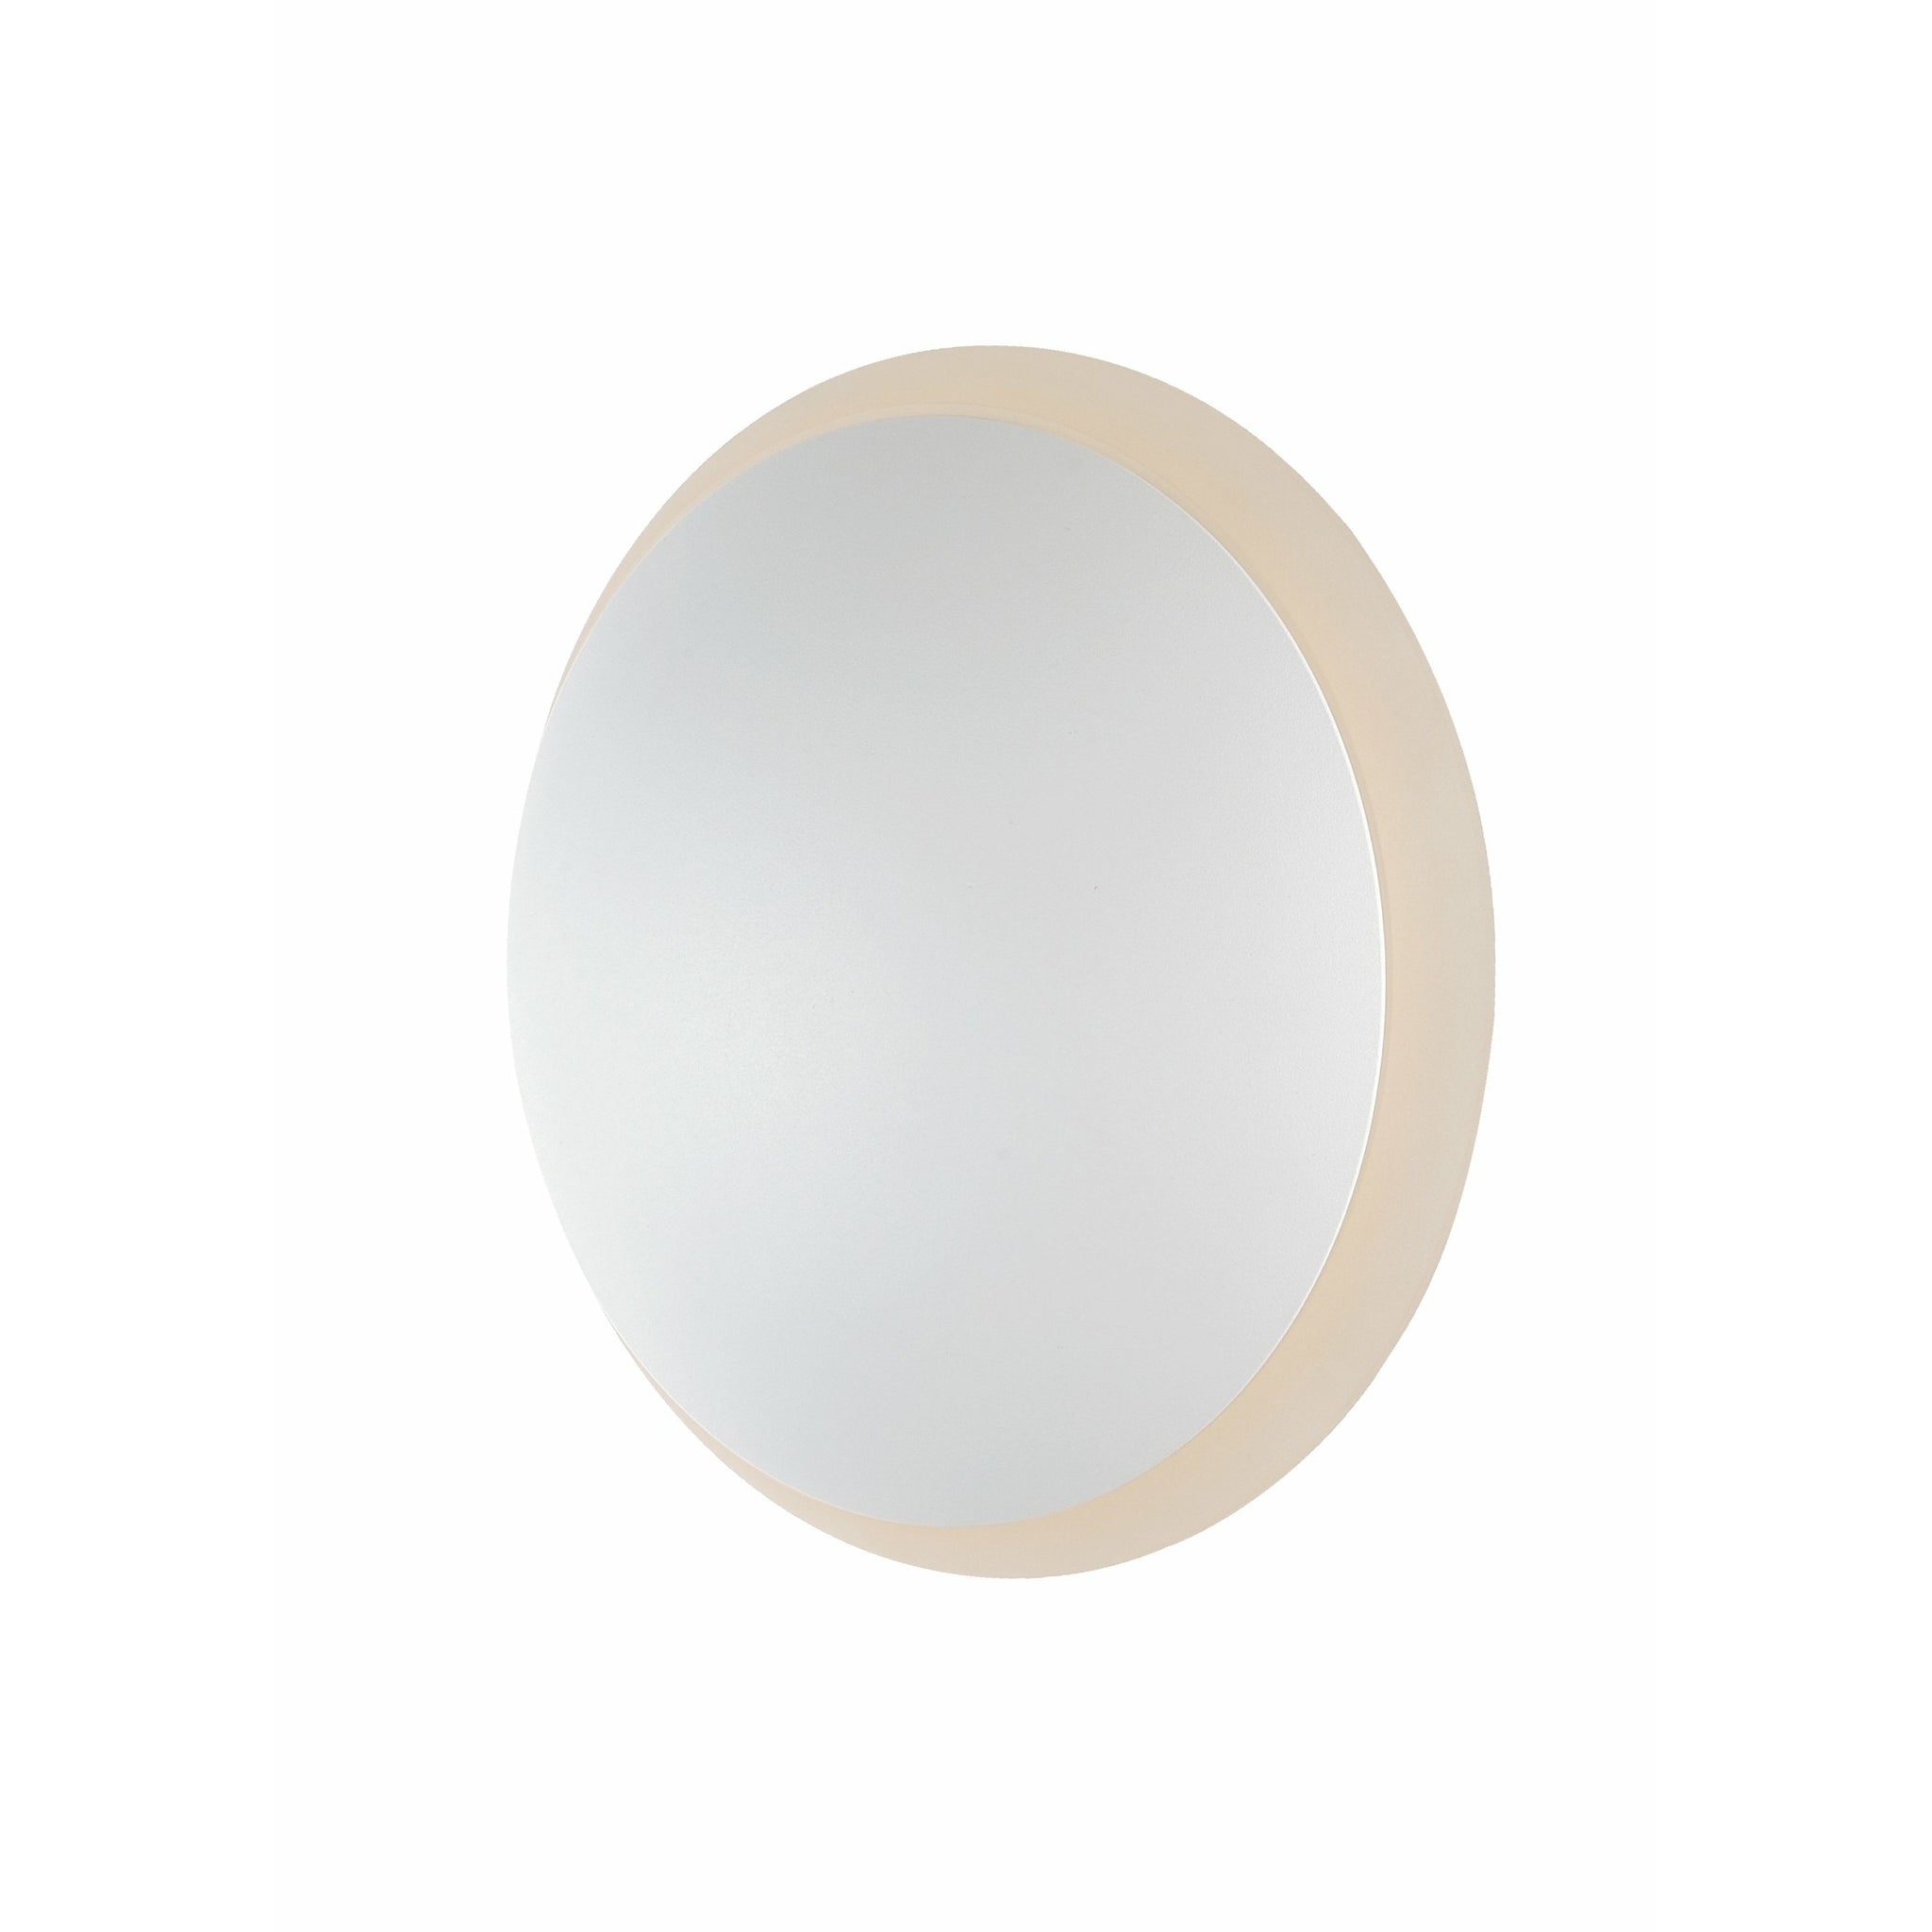 Alumilux Sconce Outdoor Wall Light White